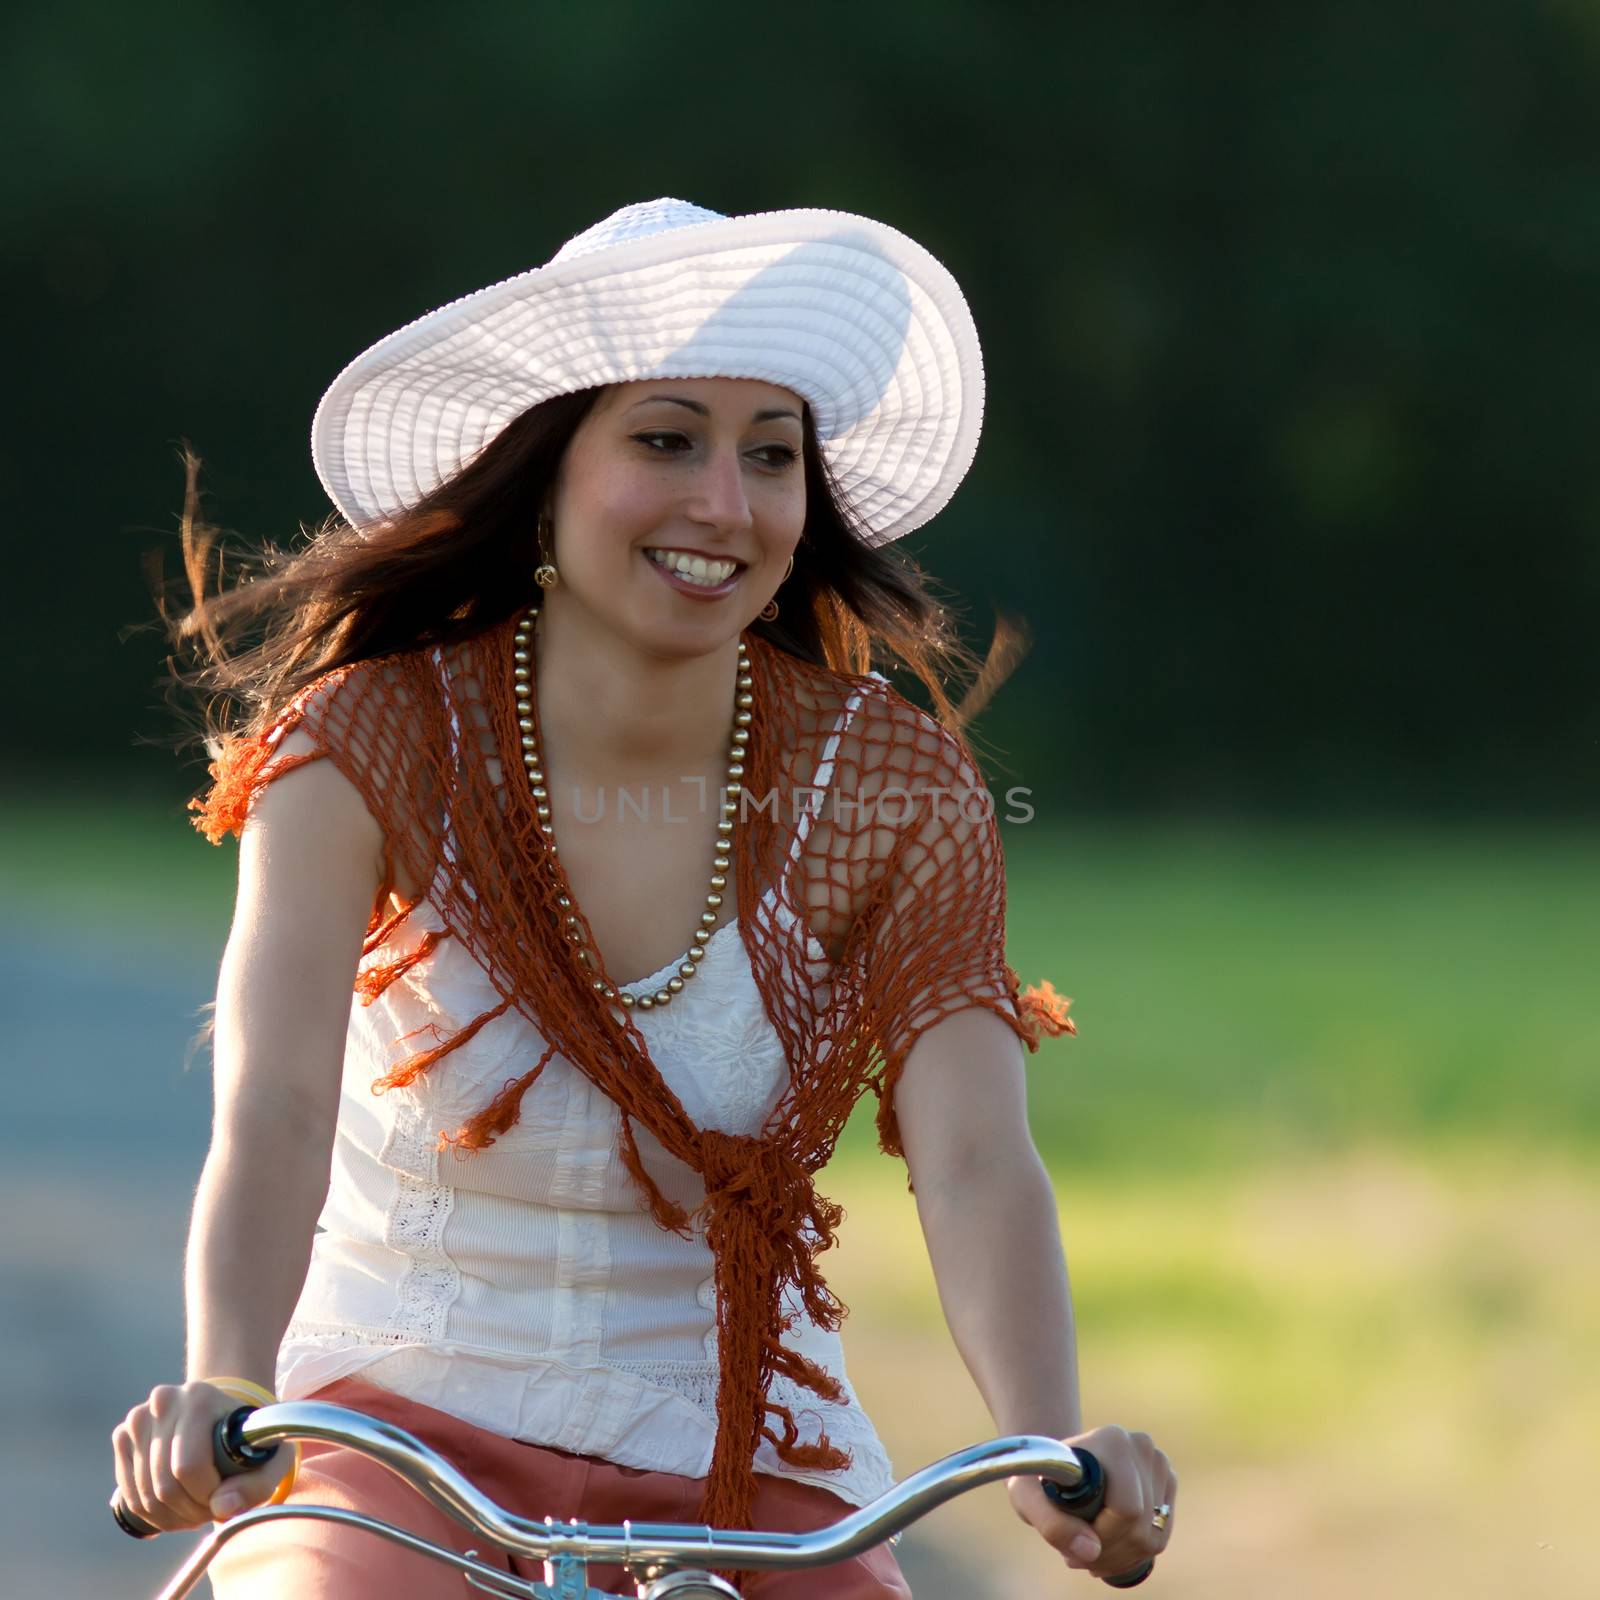 Woman in orange skirt and white hat riding on a retro bike in meadow view from the front